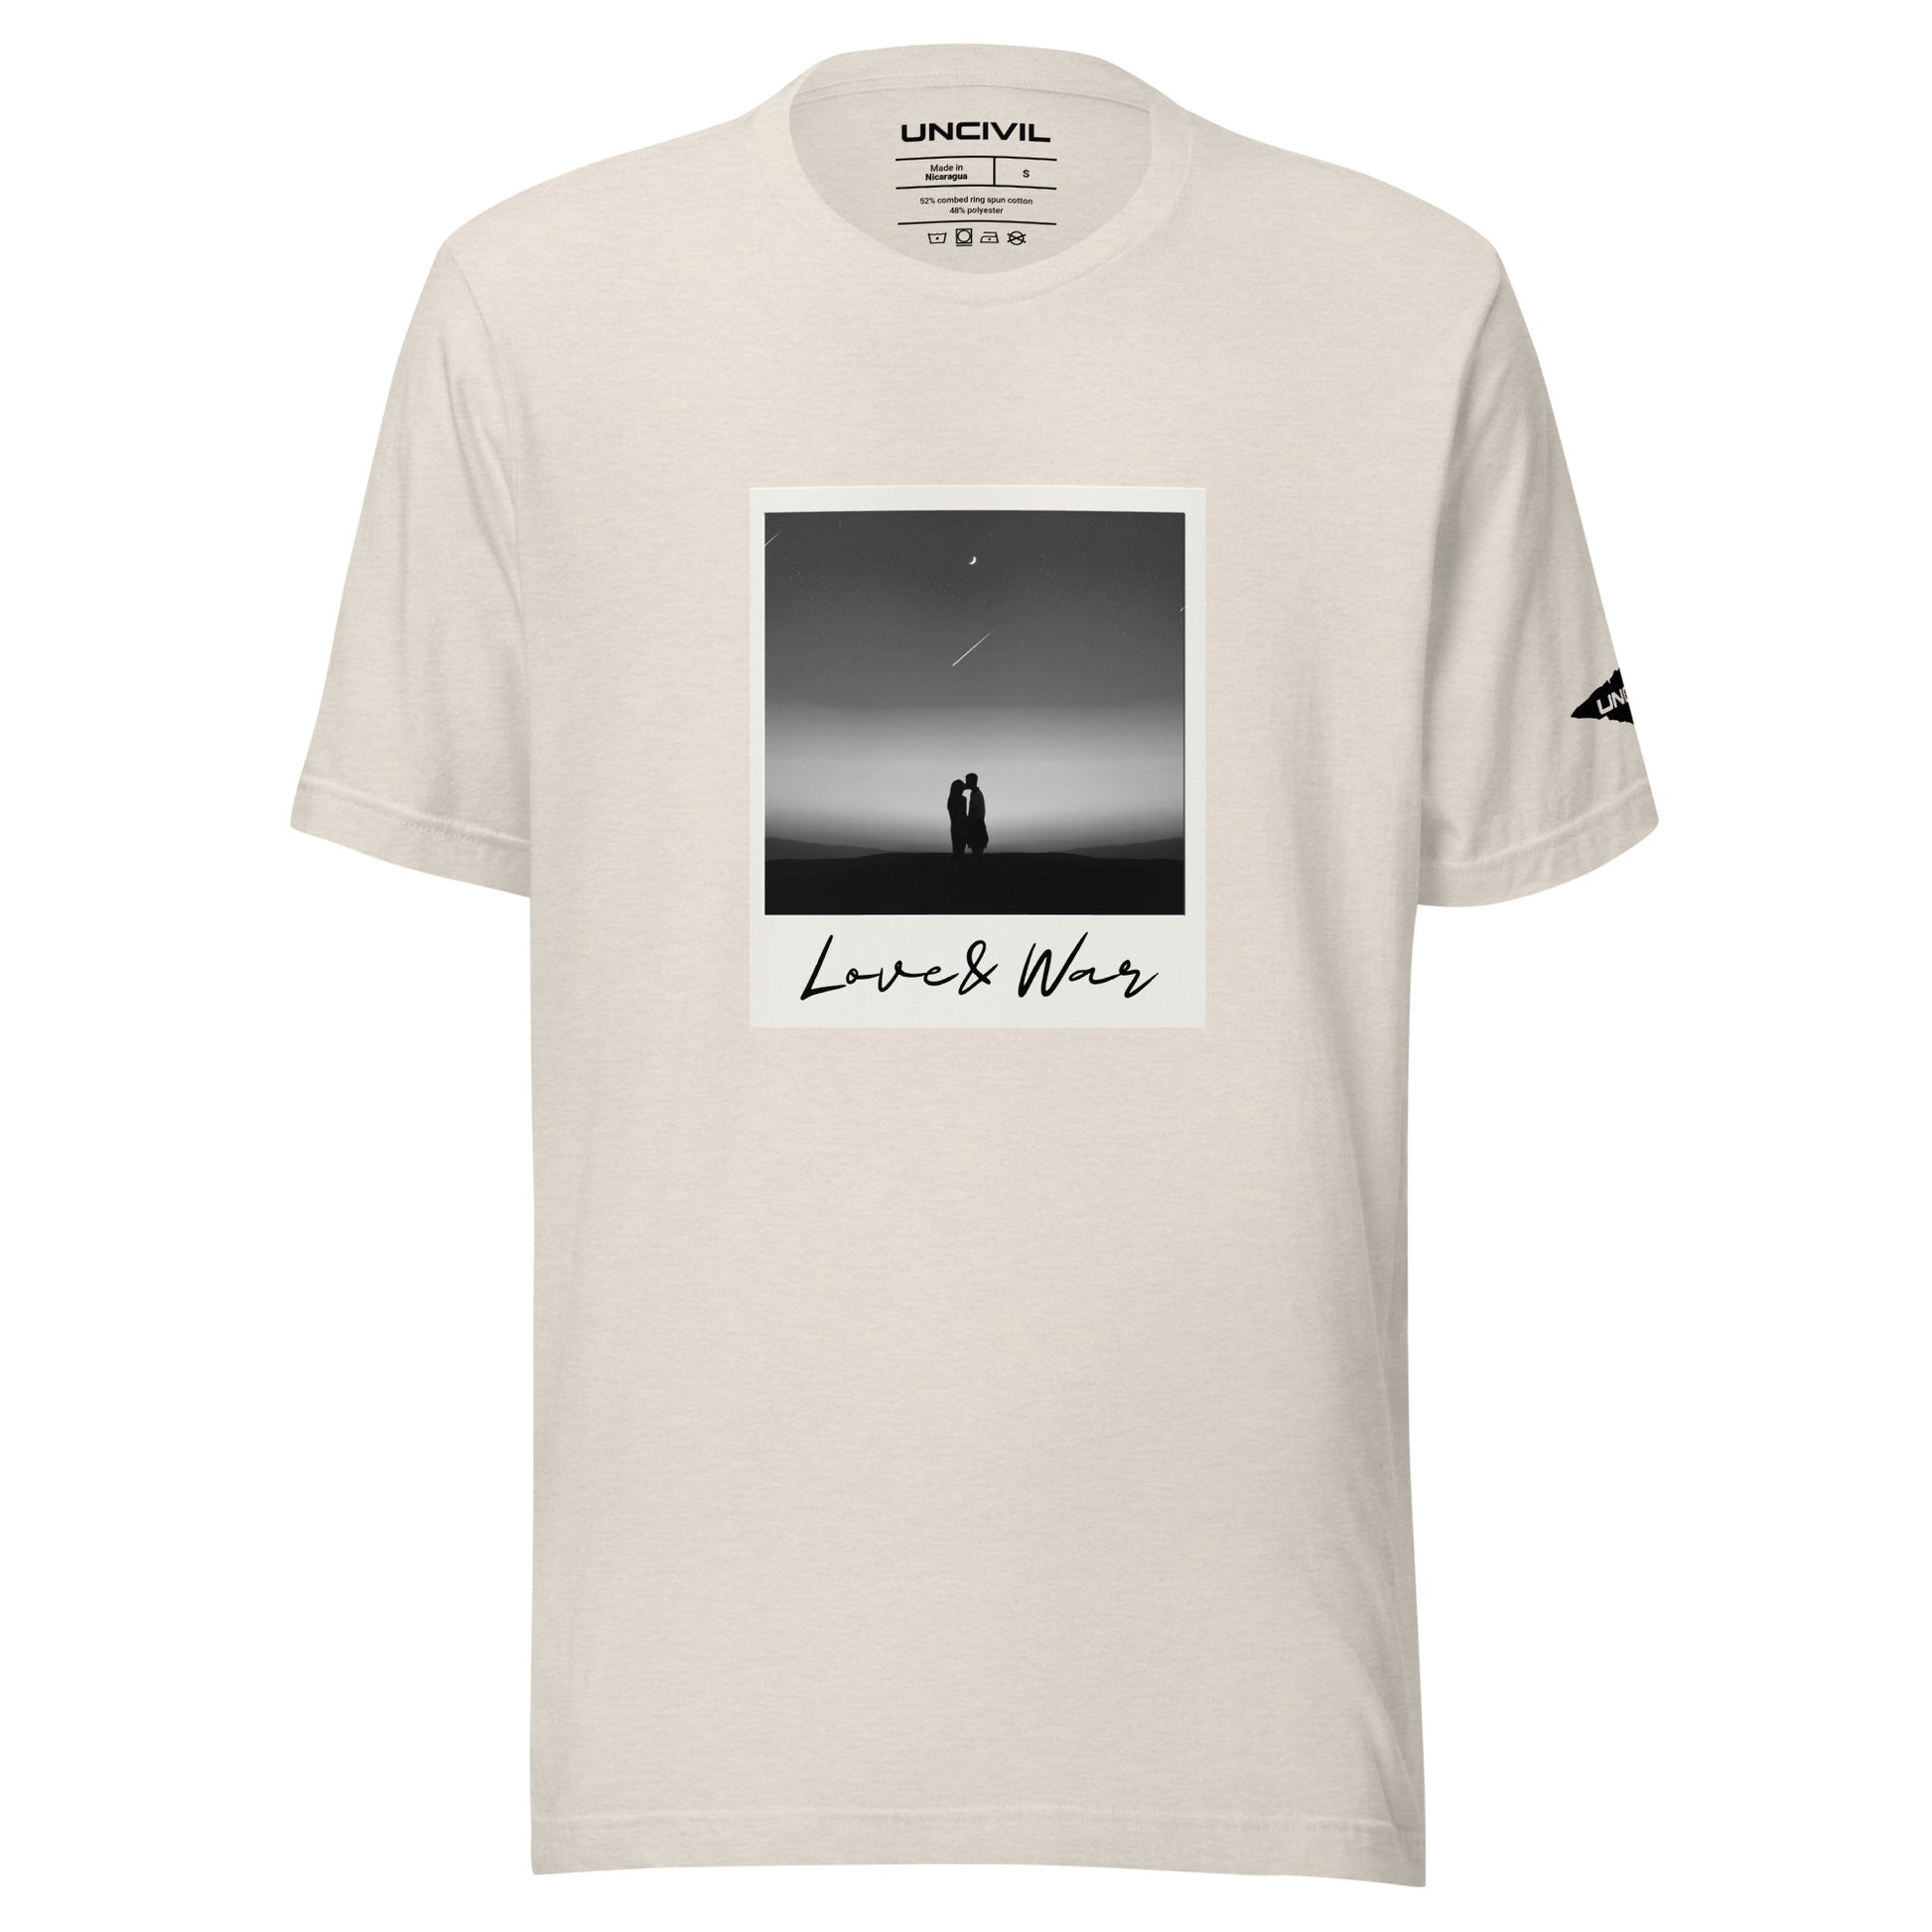 Love and War shirt. Featuring a Polaroid photo of a couple in black and white. Heather Dust unisex shirt.